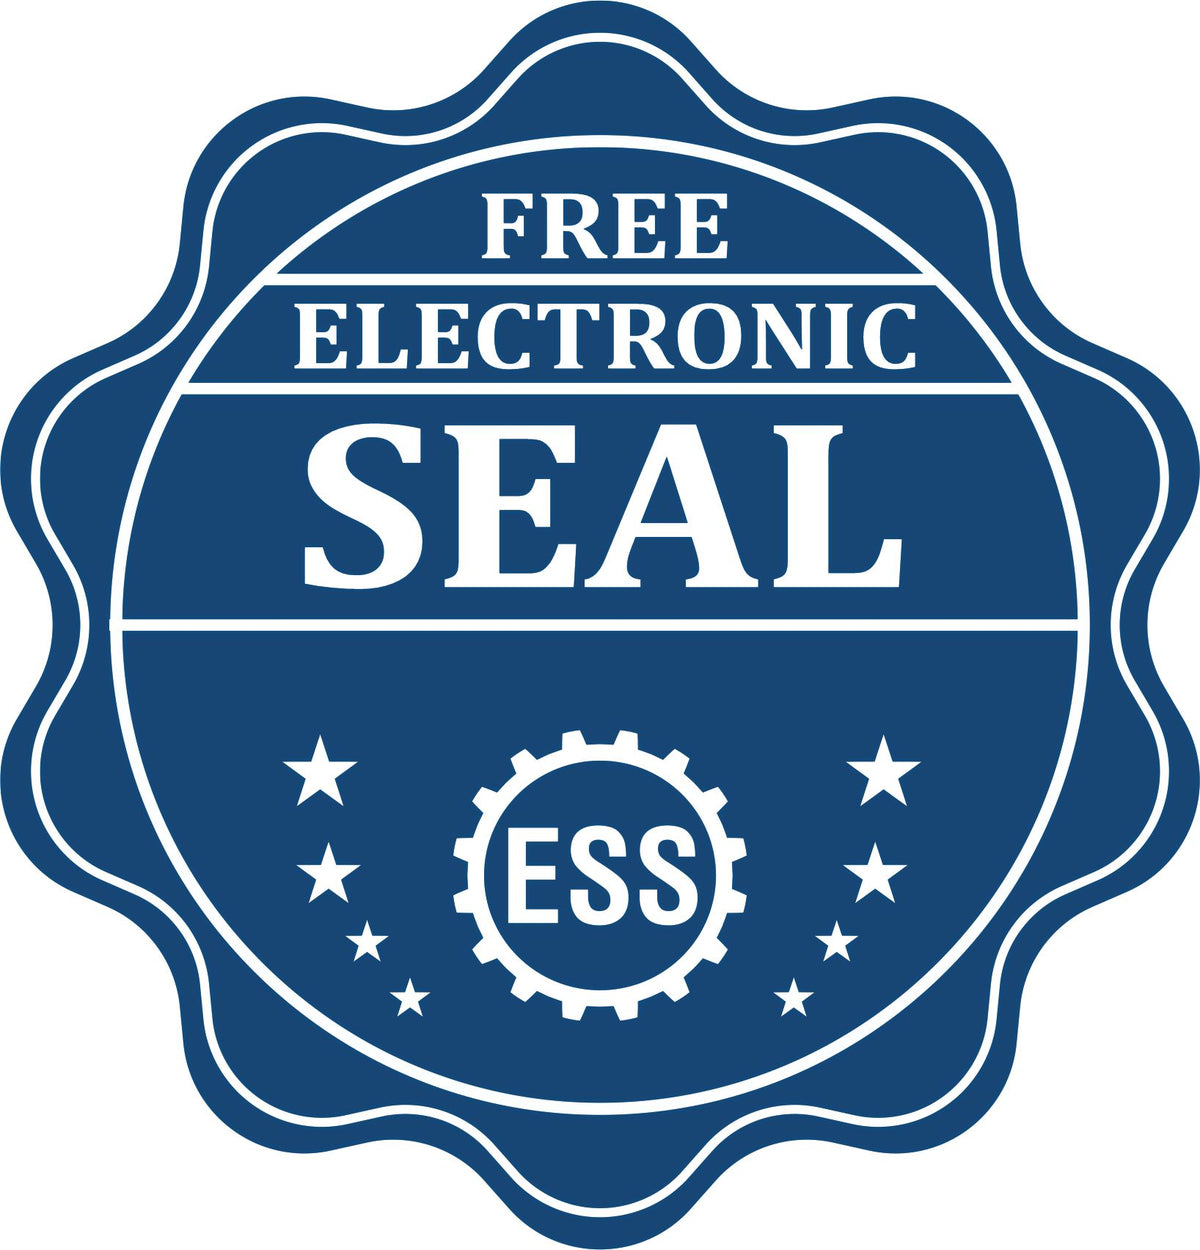 A badge showing a free electronic seal for the Super Slim Illinois Notary Public Stamp with stars and the ESS gear on the emblem.